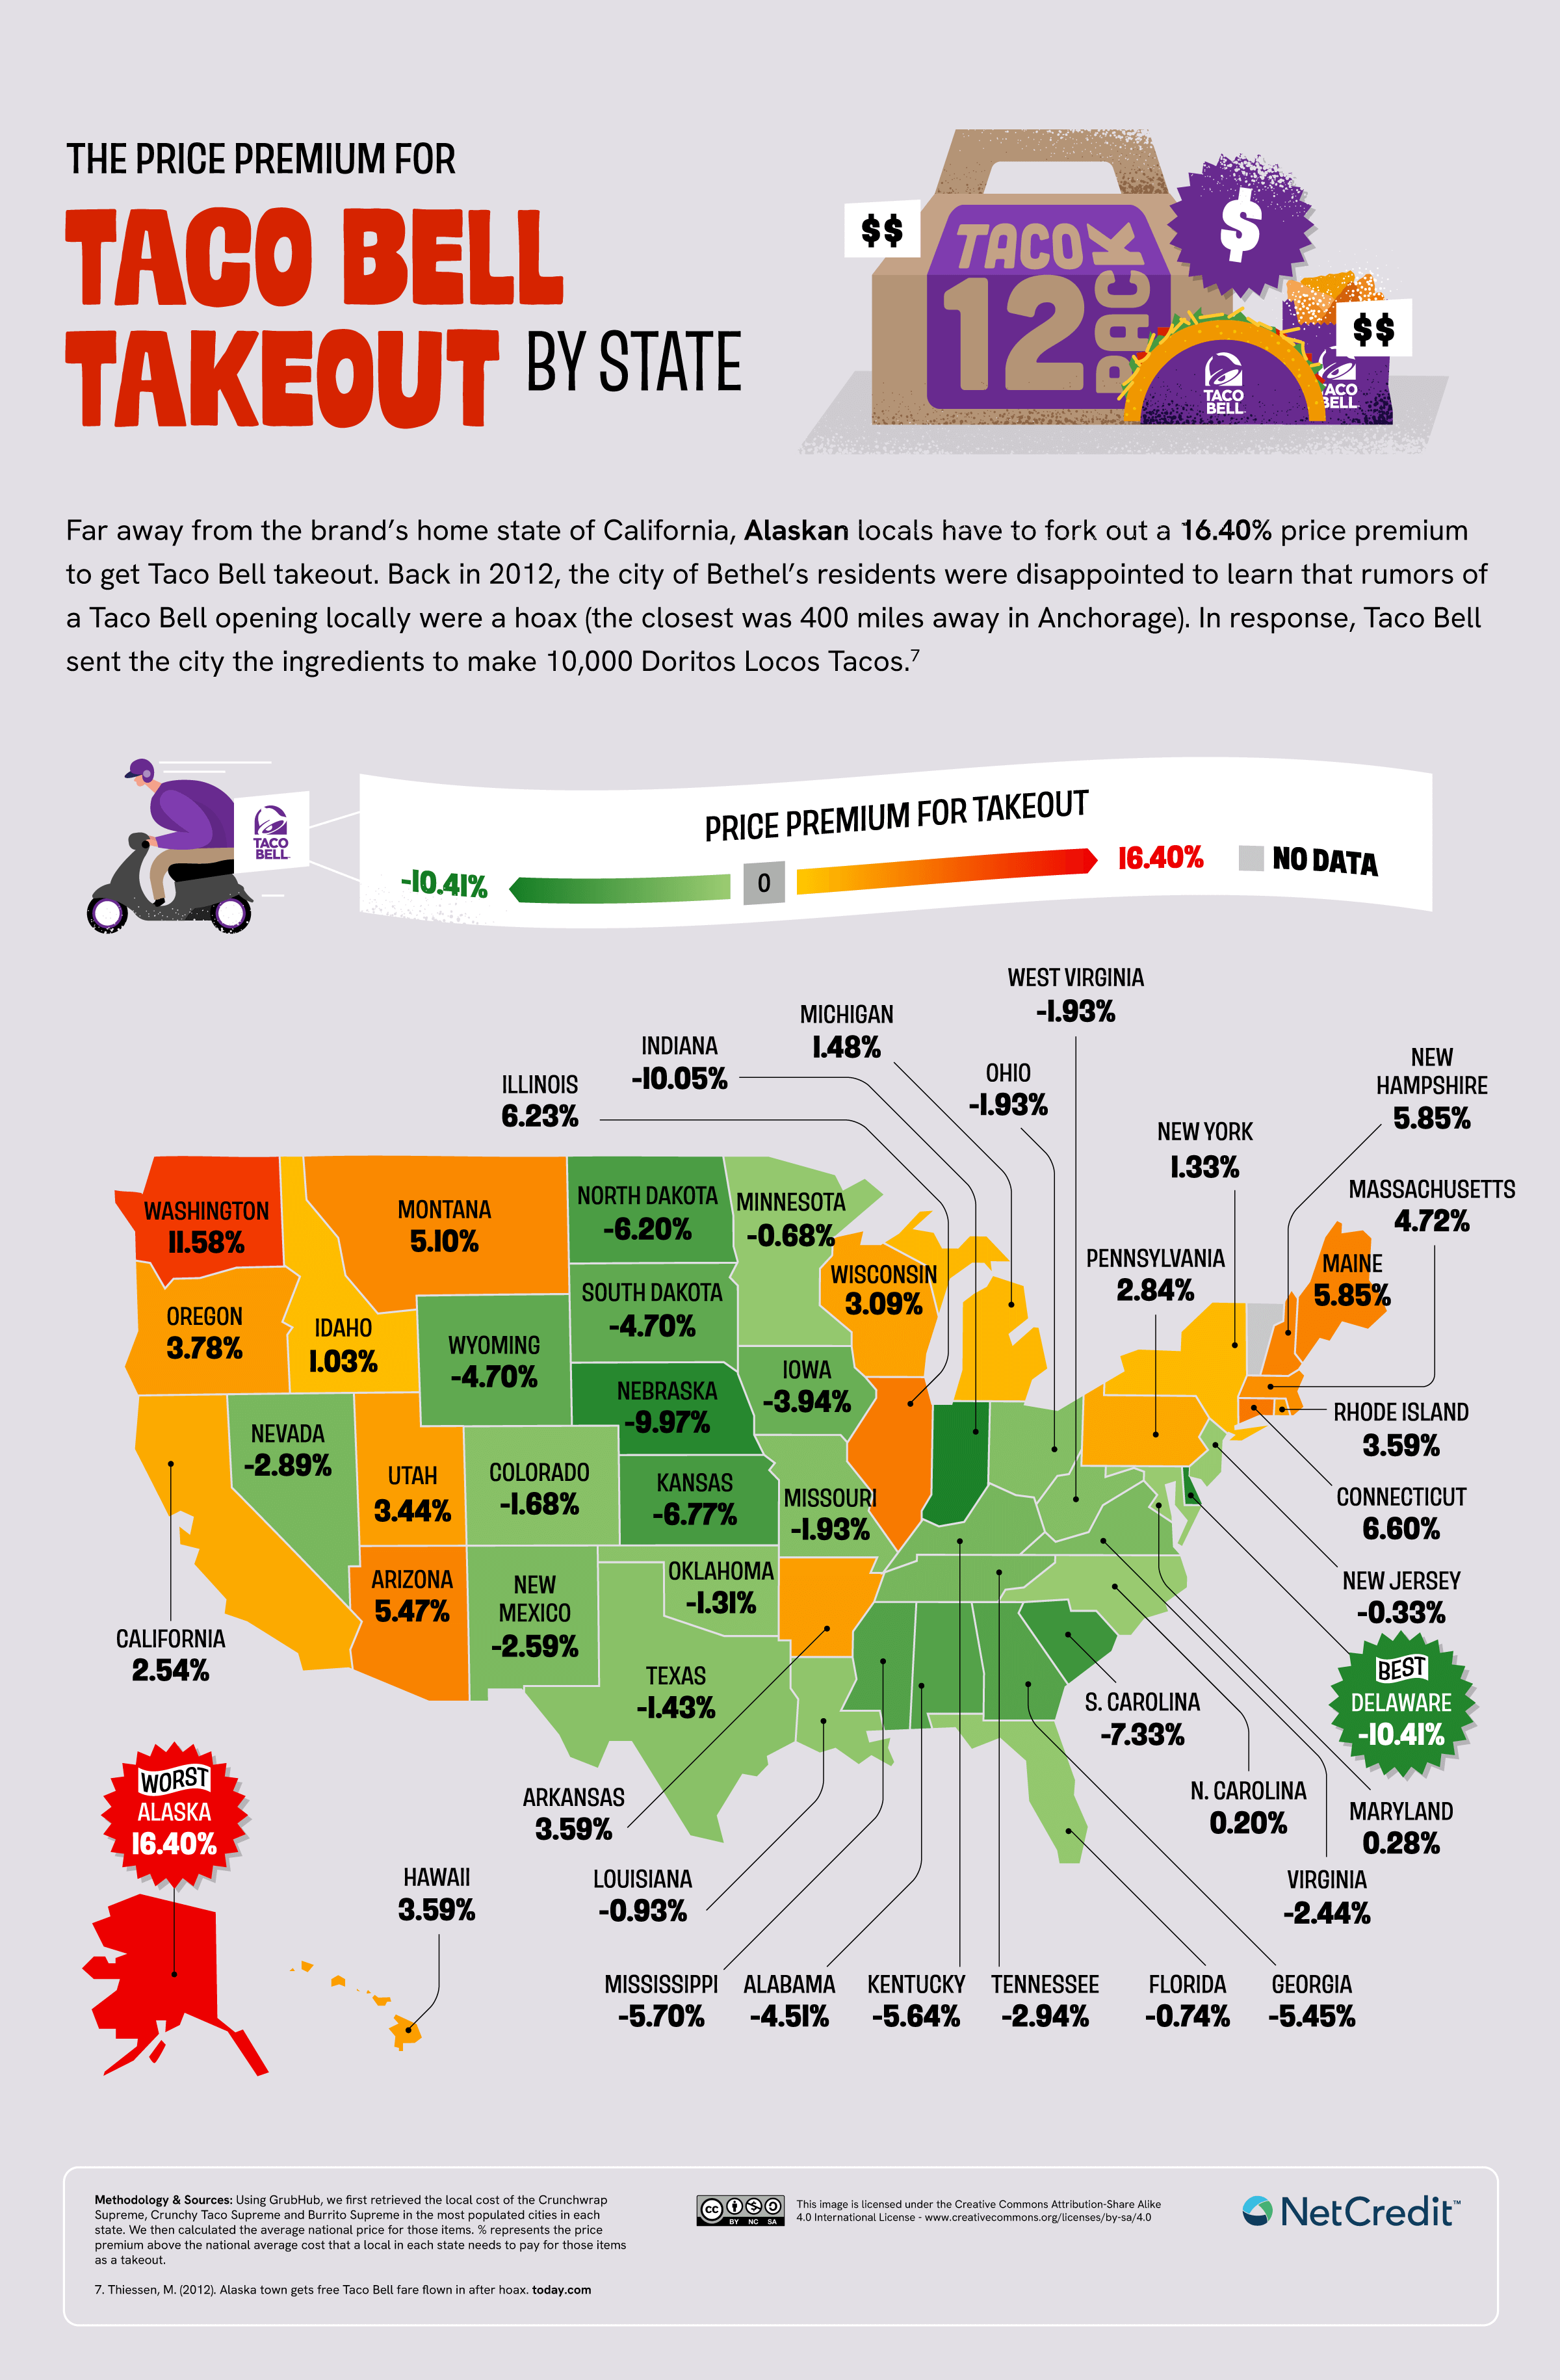 Infographic of price premium for Taco Bell takeout by state.